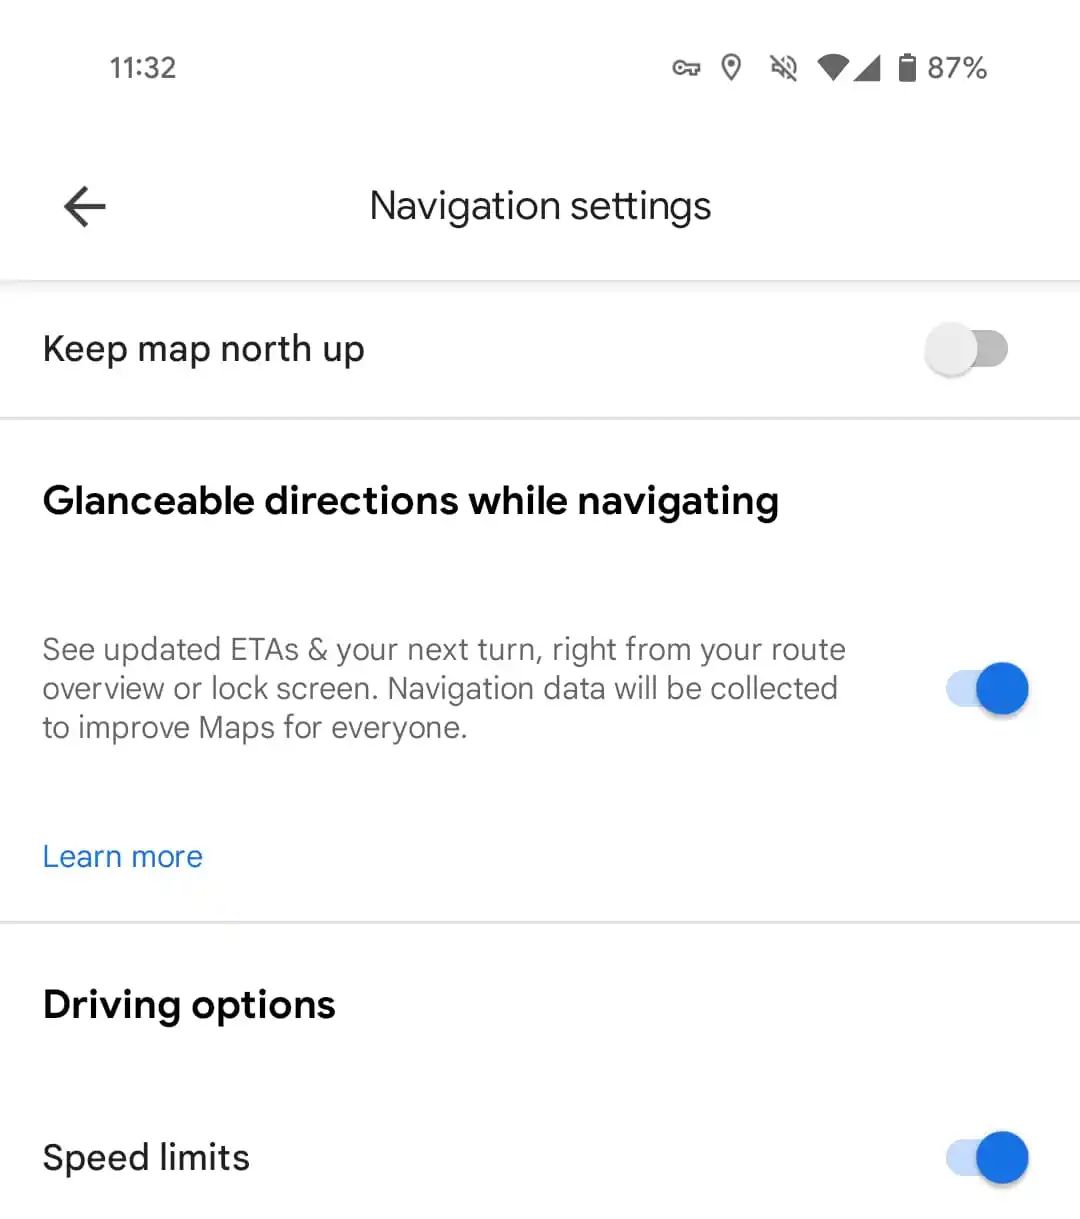 In the February launch, Google confirmed glanceable directions would arrive on Android and iOS devices worldwide in the coming months.